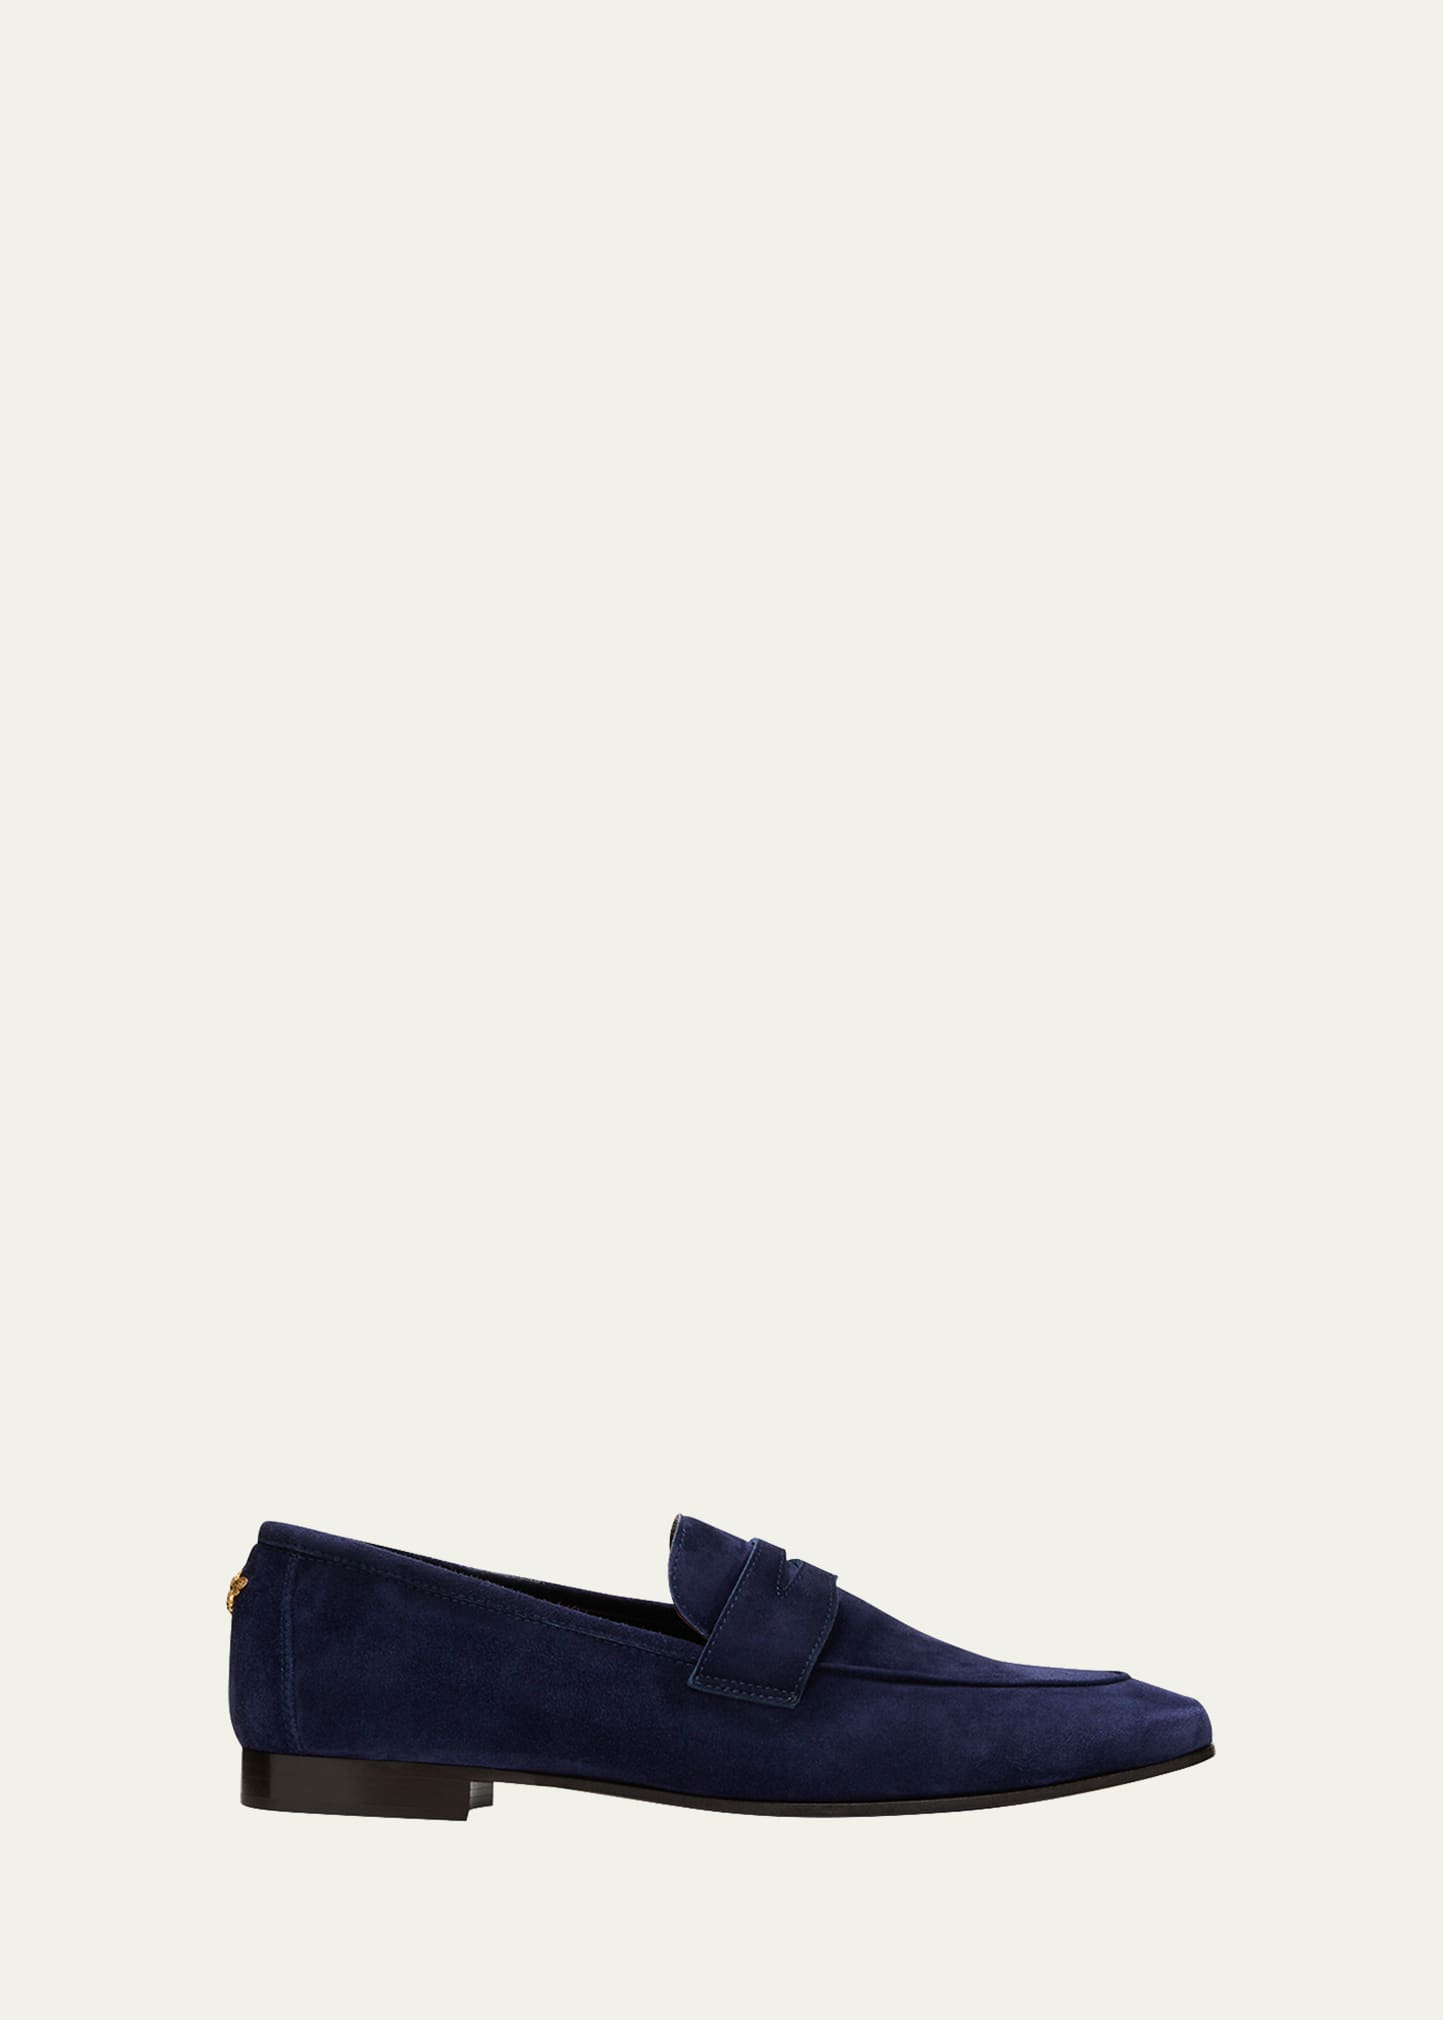 Bougeotte Suede Slip-On Penny Loafer, Navy